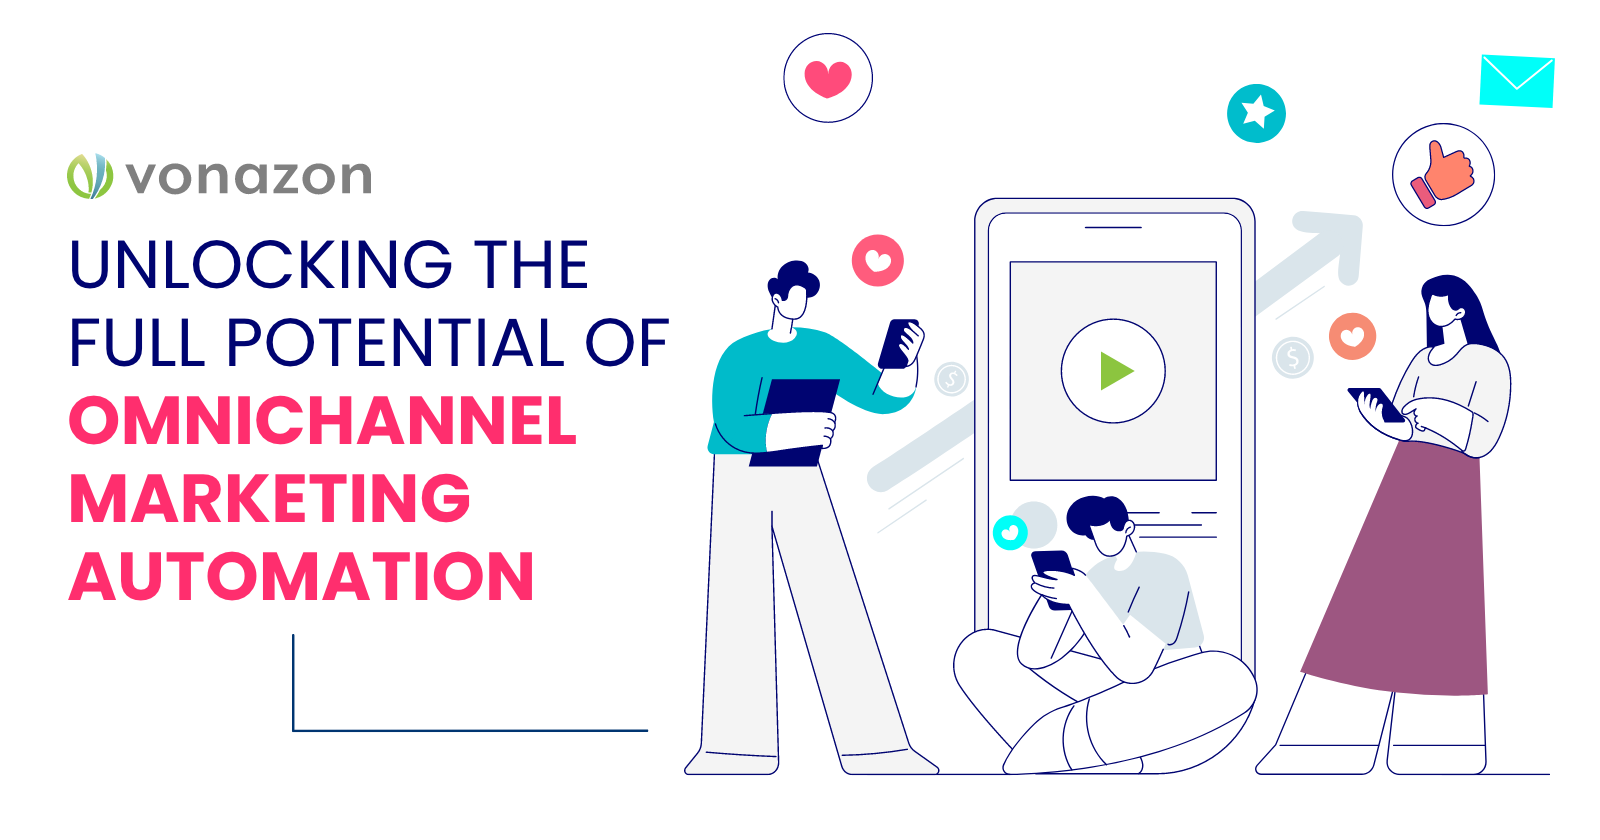 Unlocking the Full Potential of Omnichannel Marketing Automation